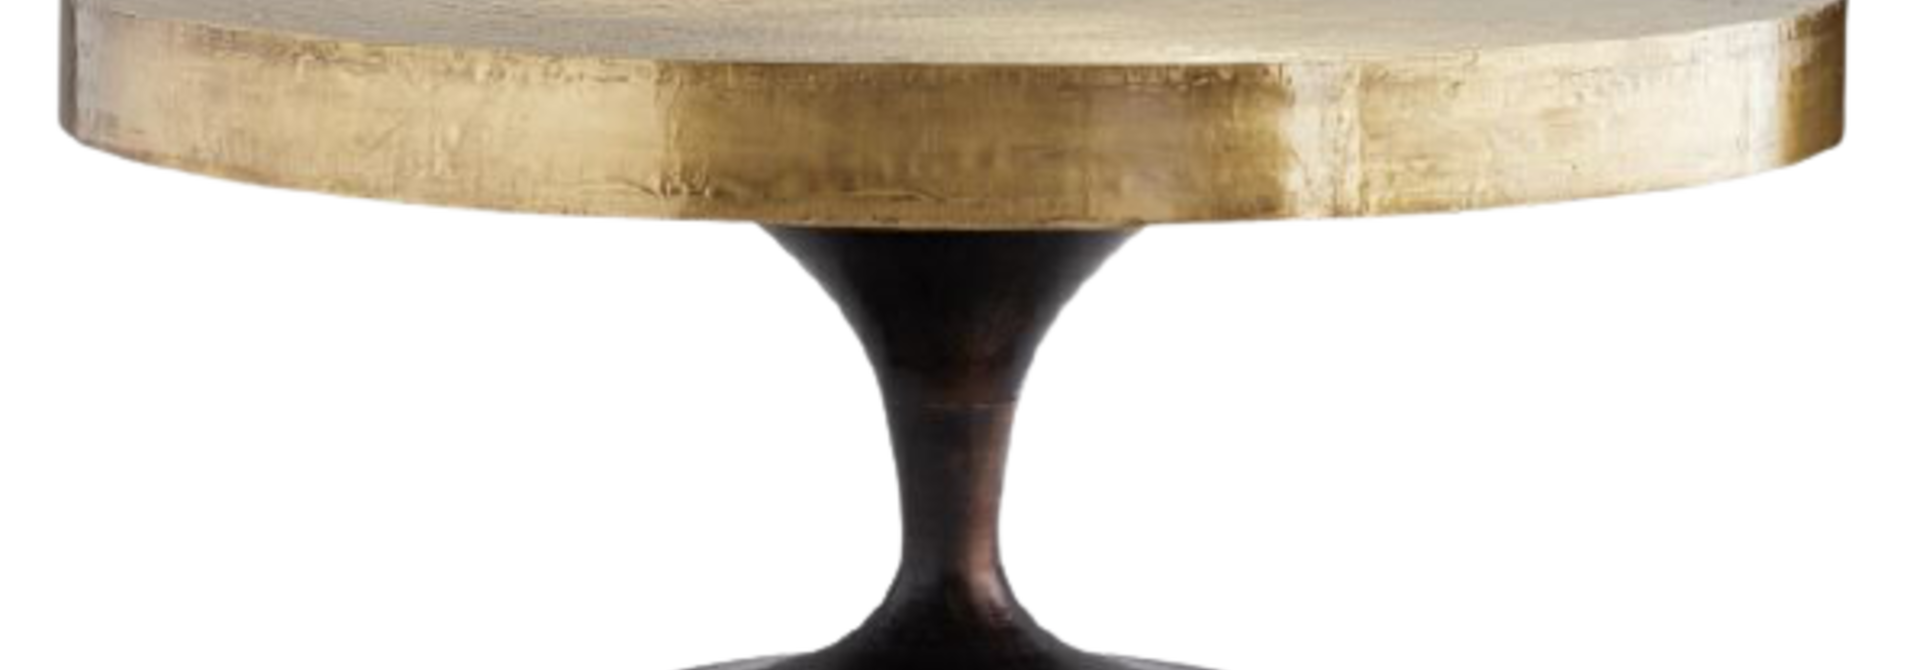 Daryl | The Cocktail Table Collection, Antique Brass - 36 Inch x 36 Inch x 16 Inch